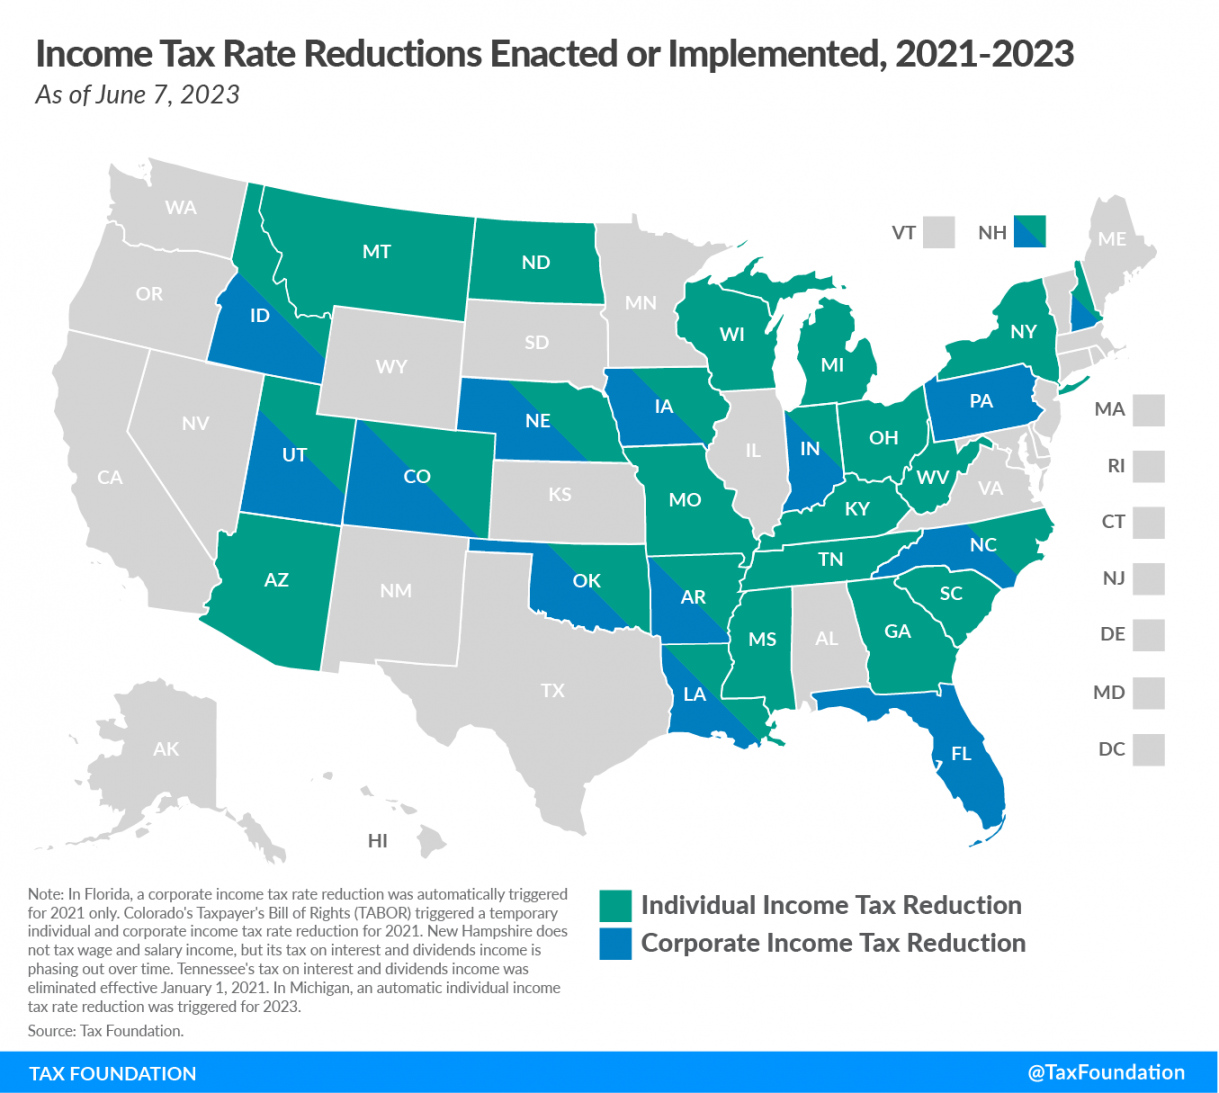 State Tax Reform and Relief Trend Continues in